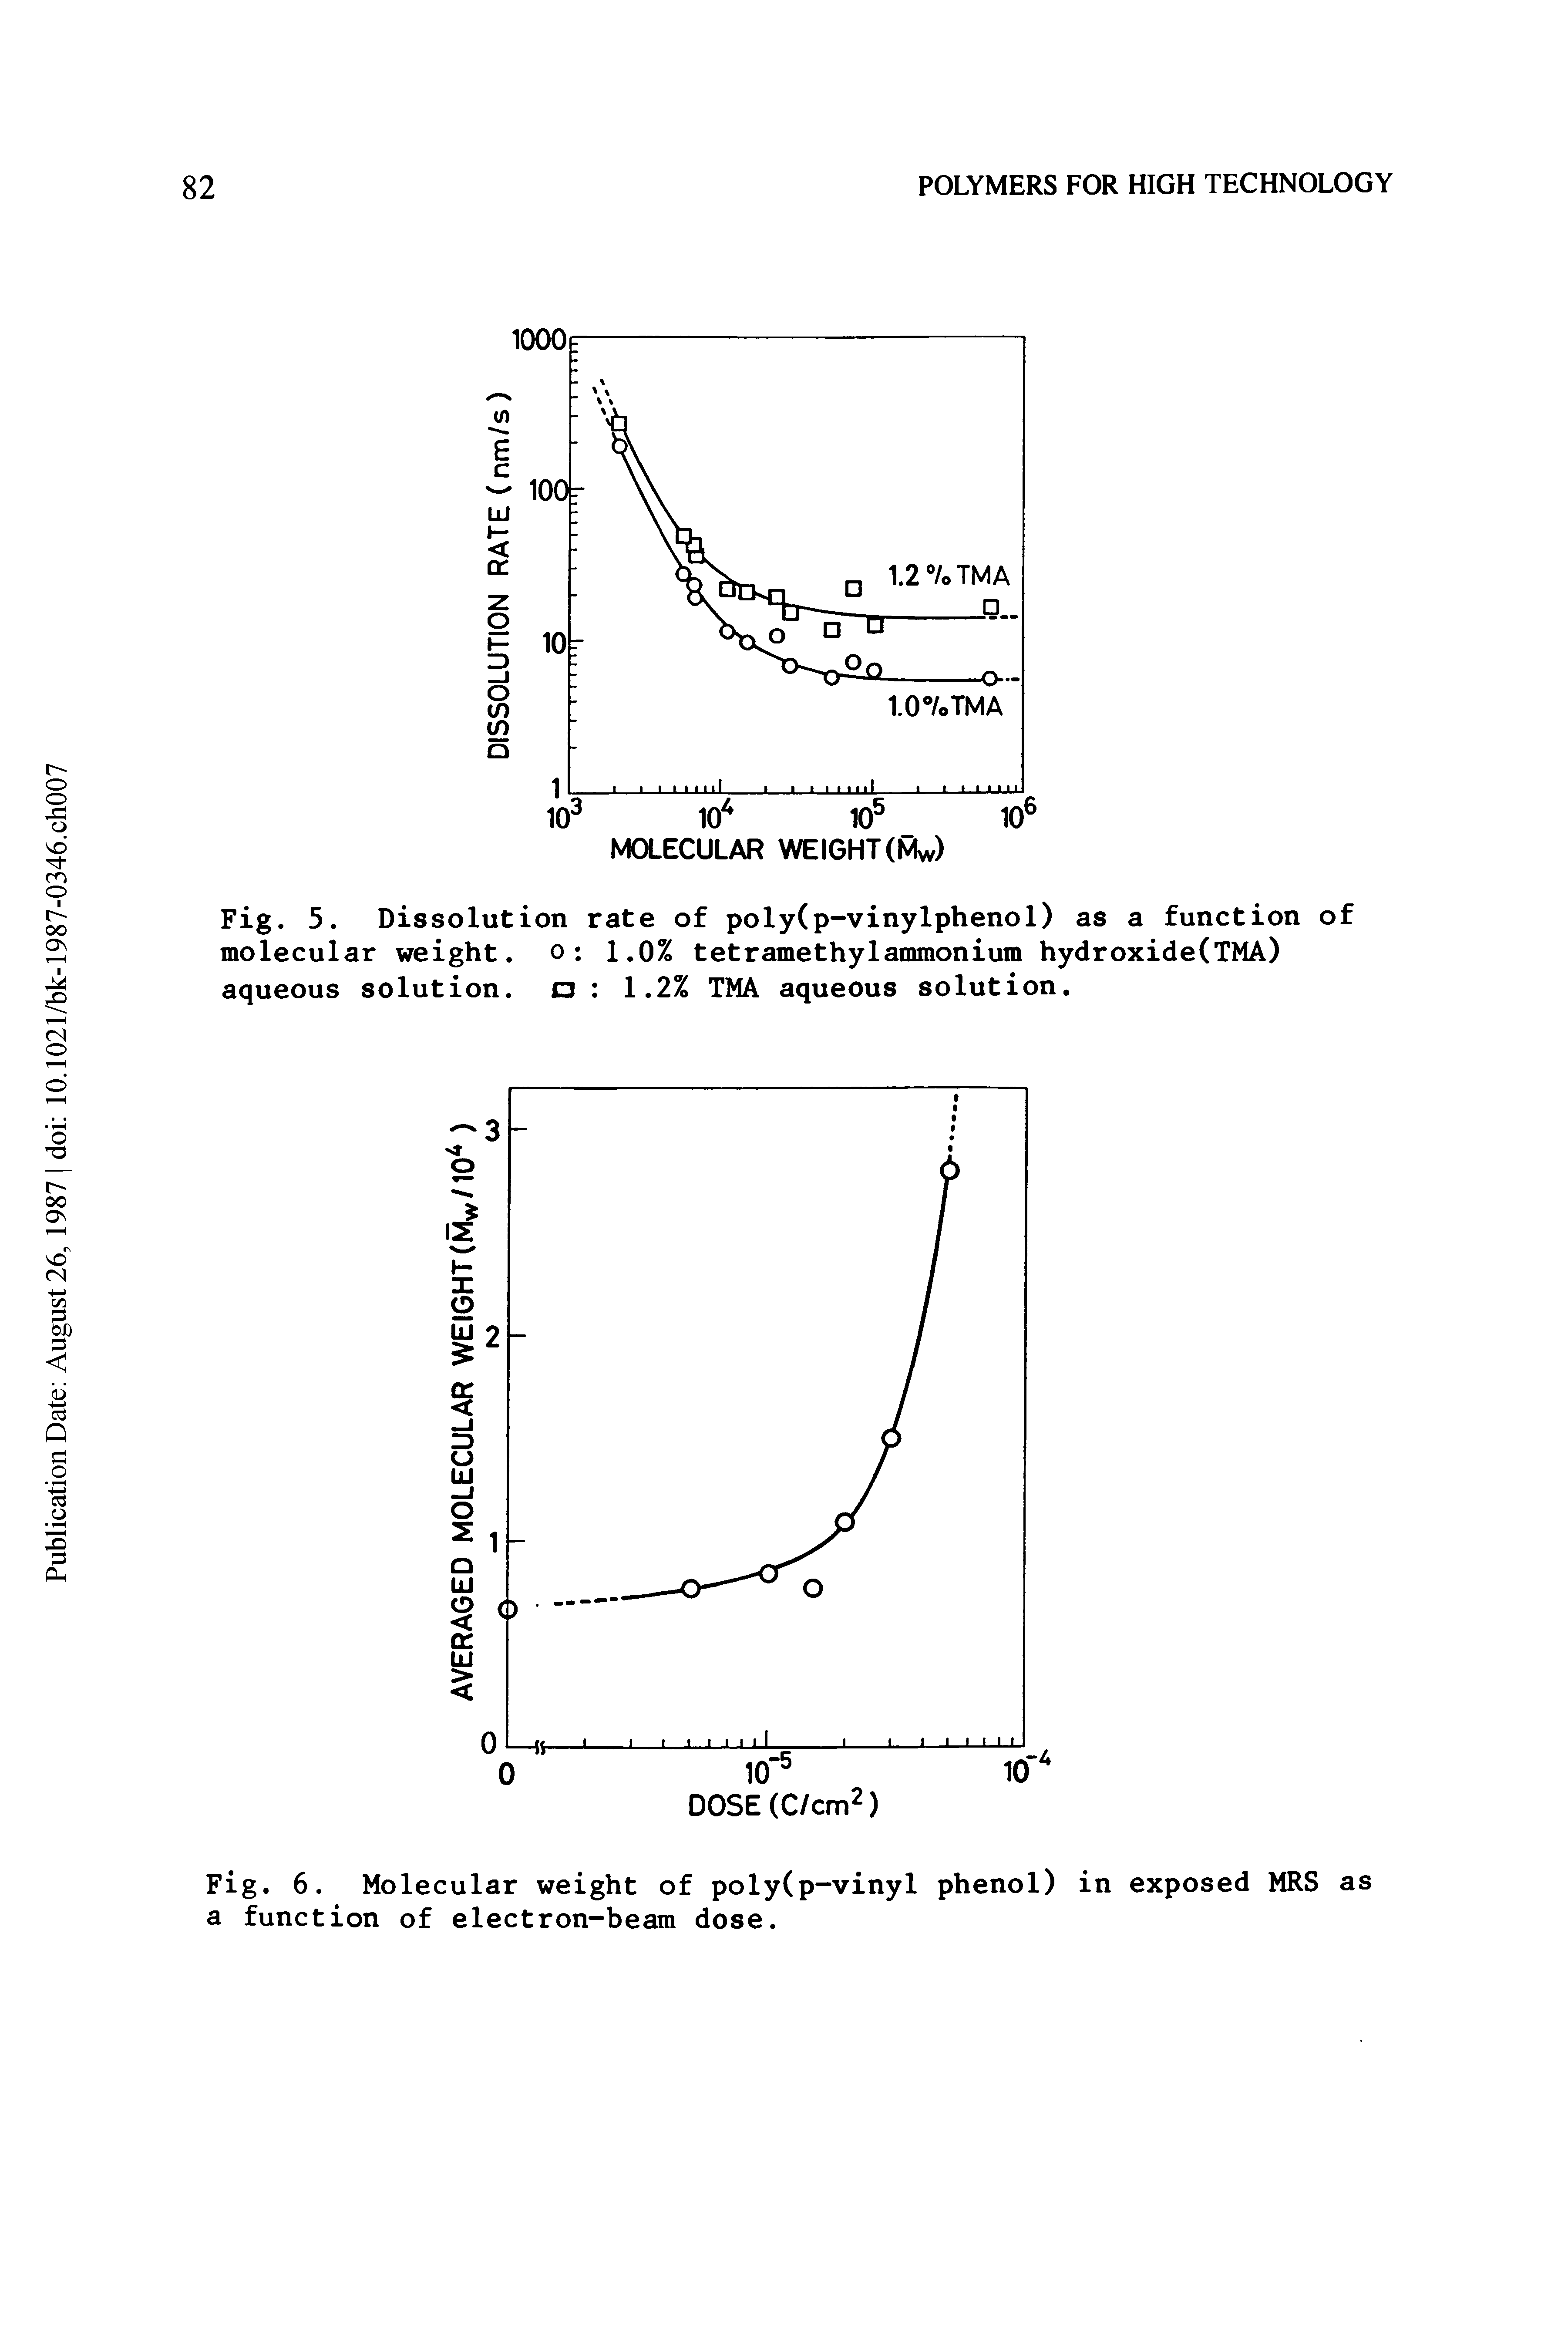 Fig. 6. Molecular weight of poly(p-vinyl phenol) in exposed MRS as a function of electron-beam dose.